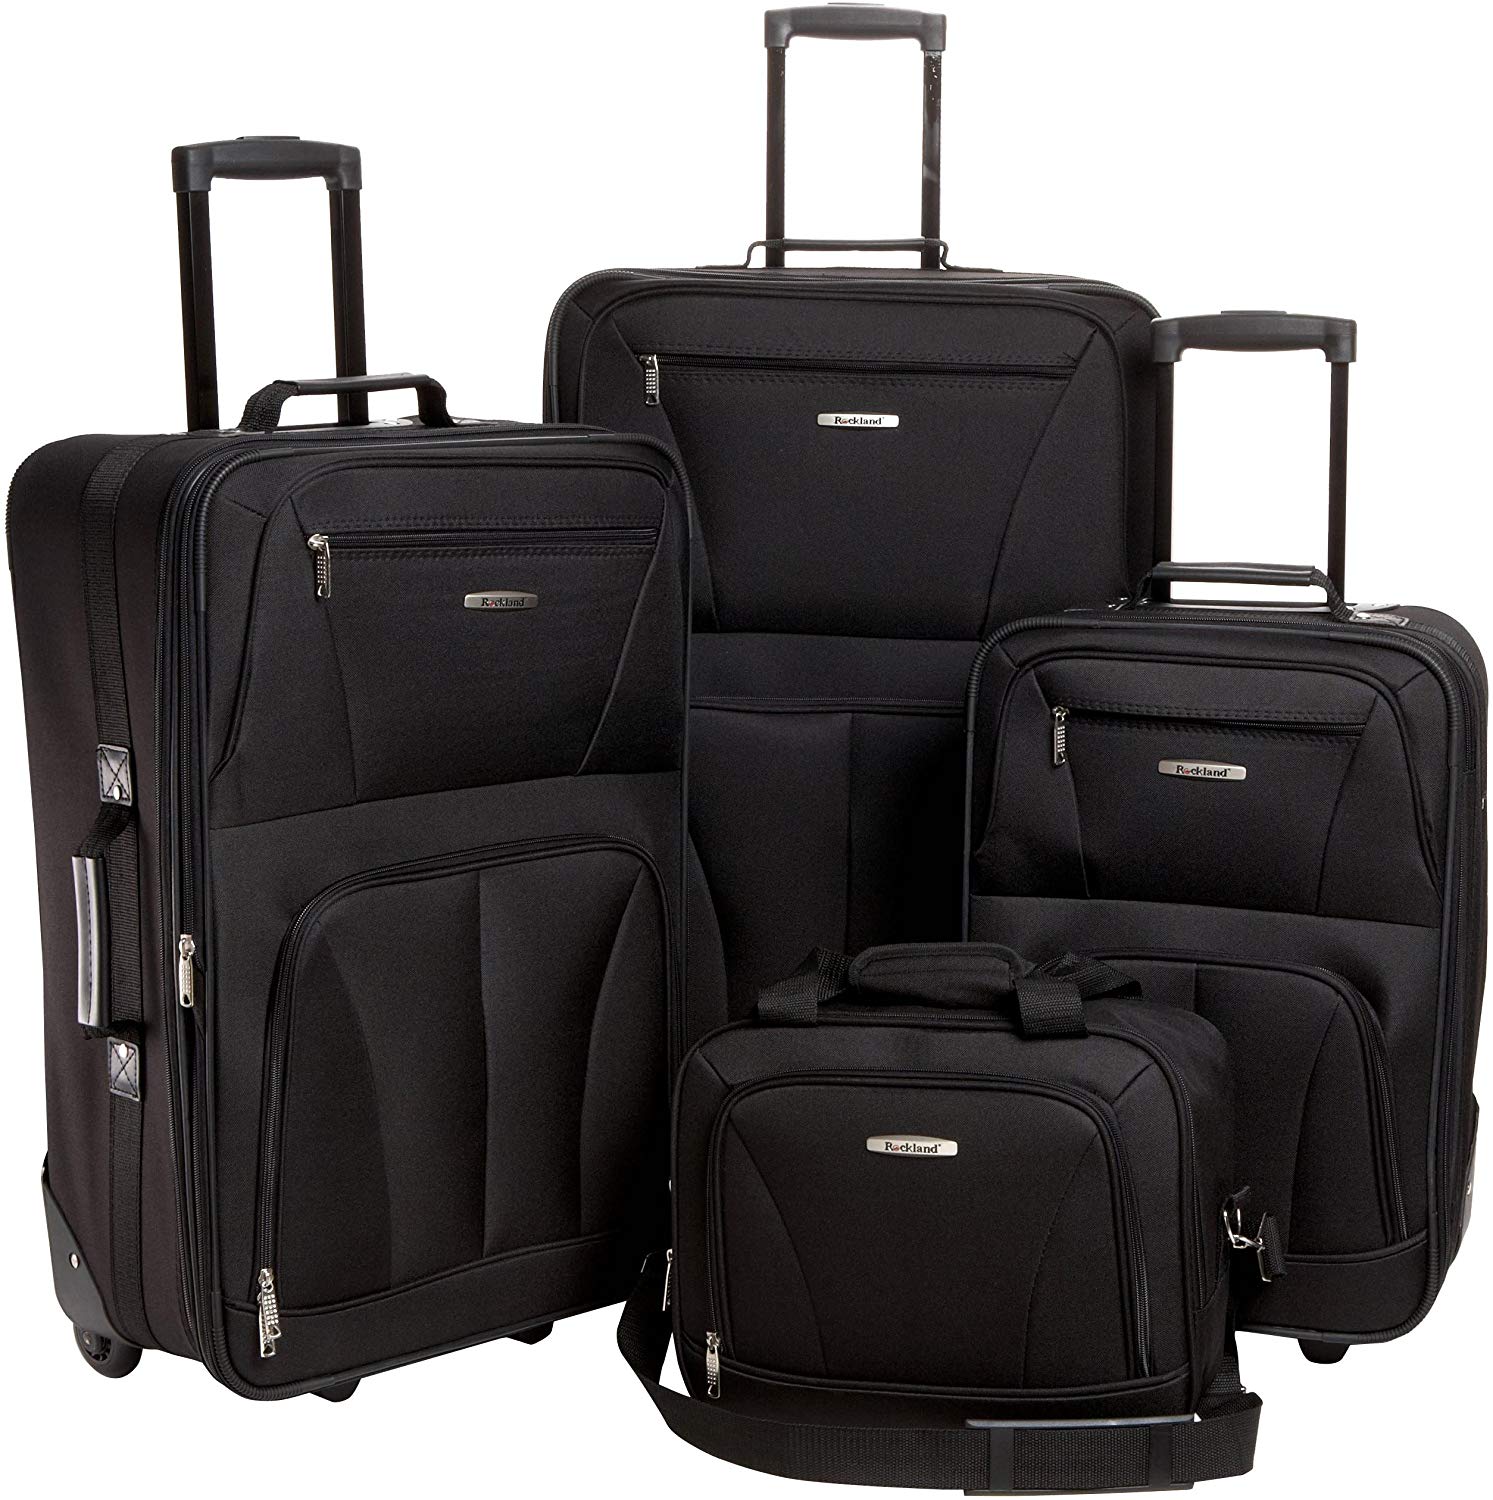 Rockland Brand Luggage Review